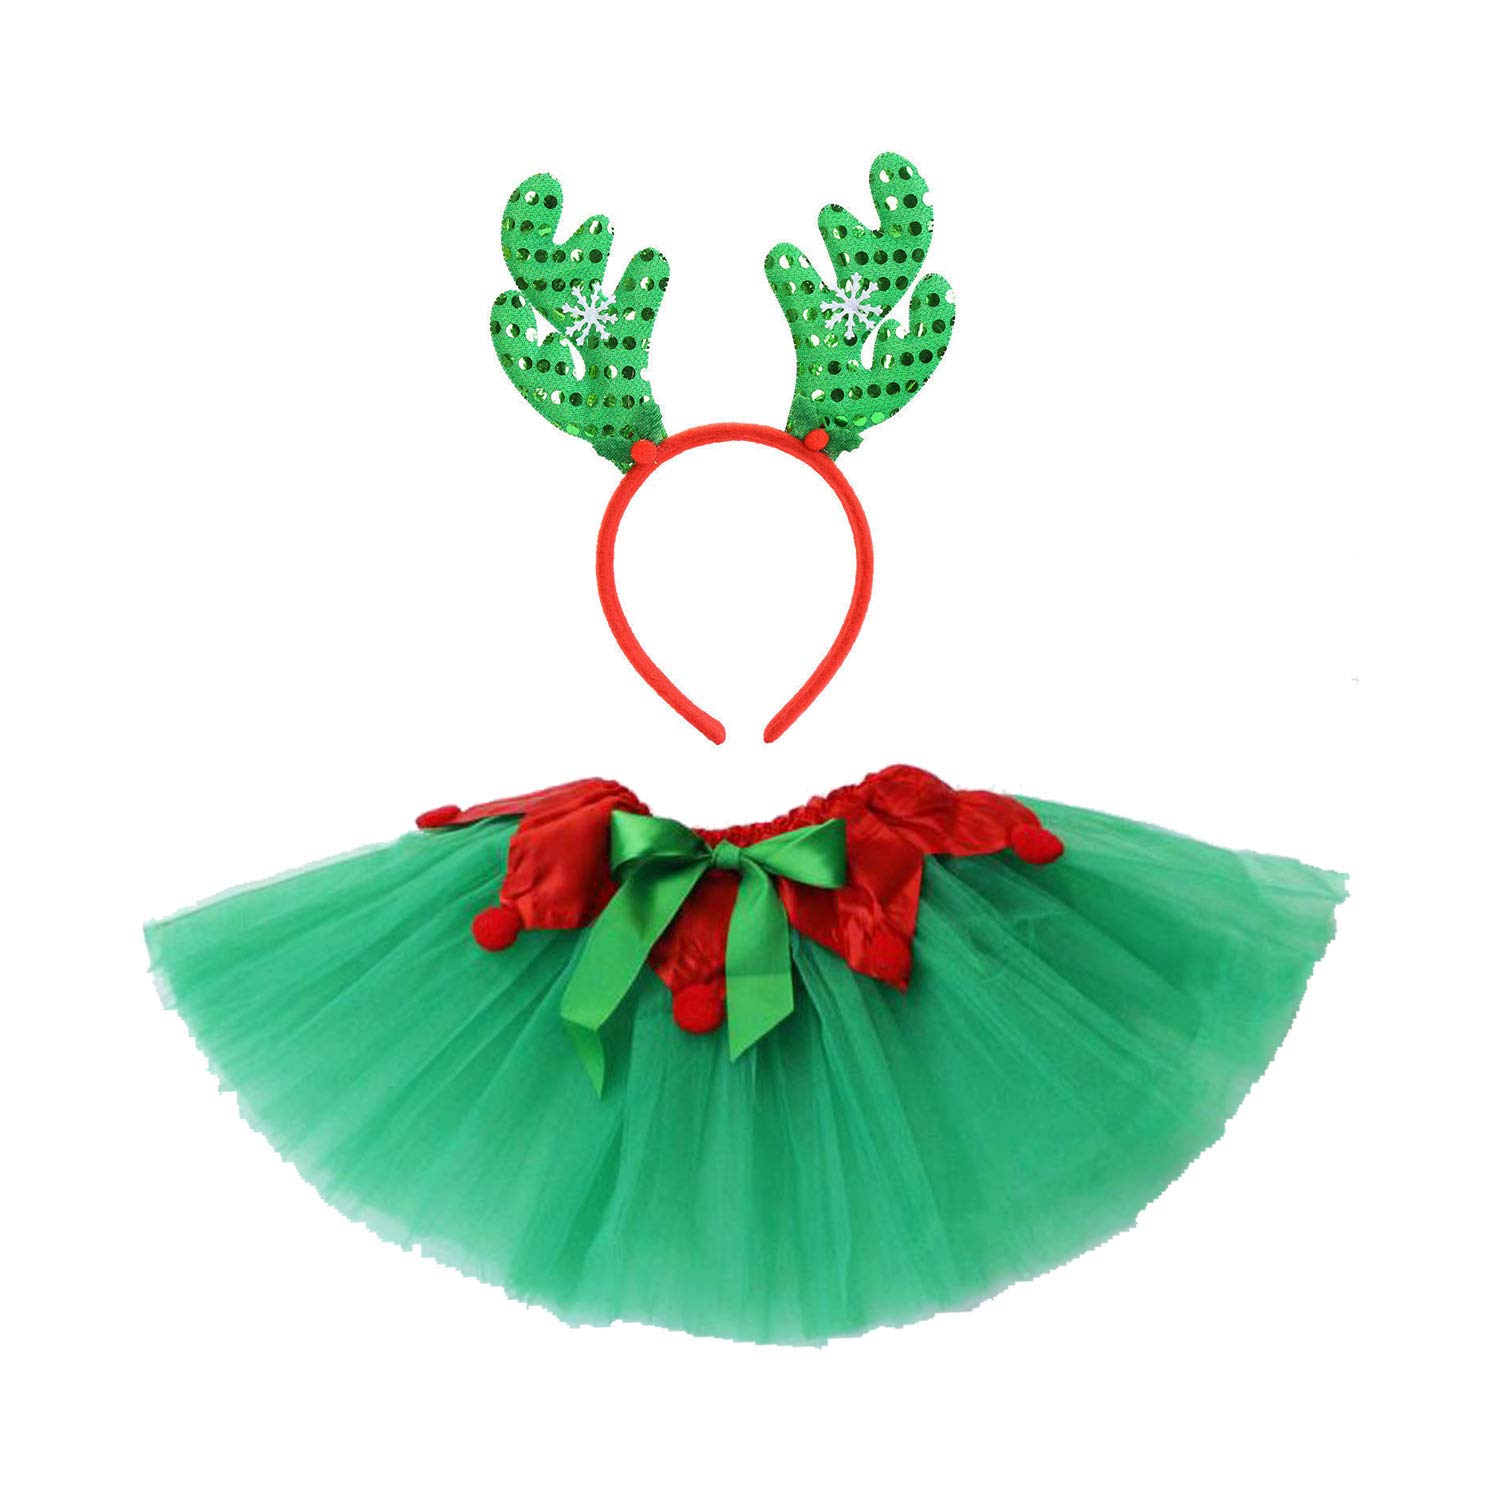 Danballto Princess Costume Birthday Party Fancy Dress Up for Girls with Accessories 2-8 Years